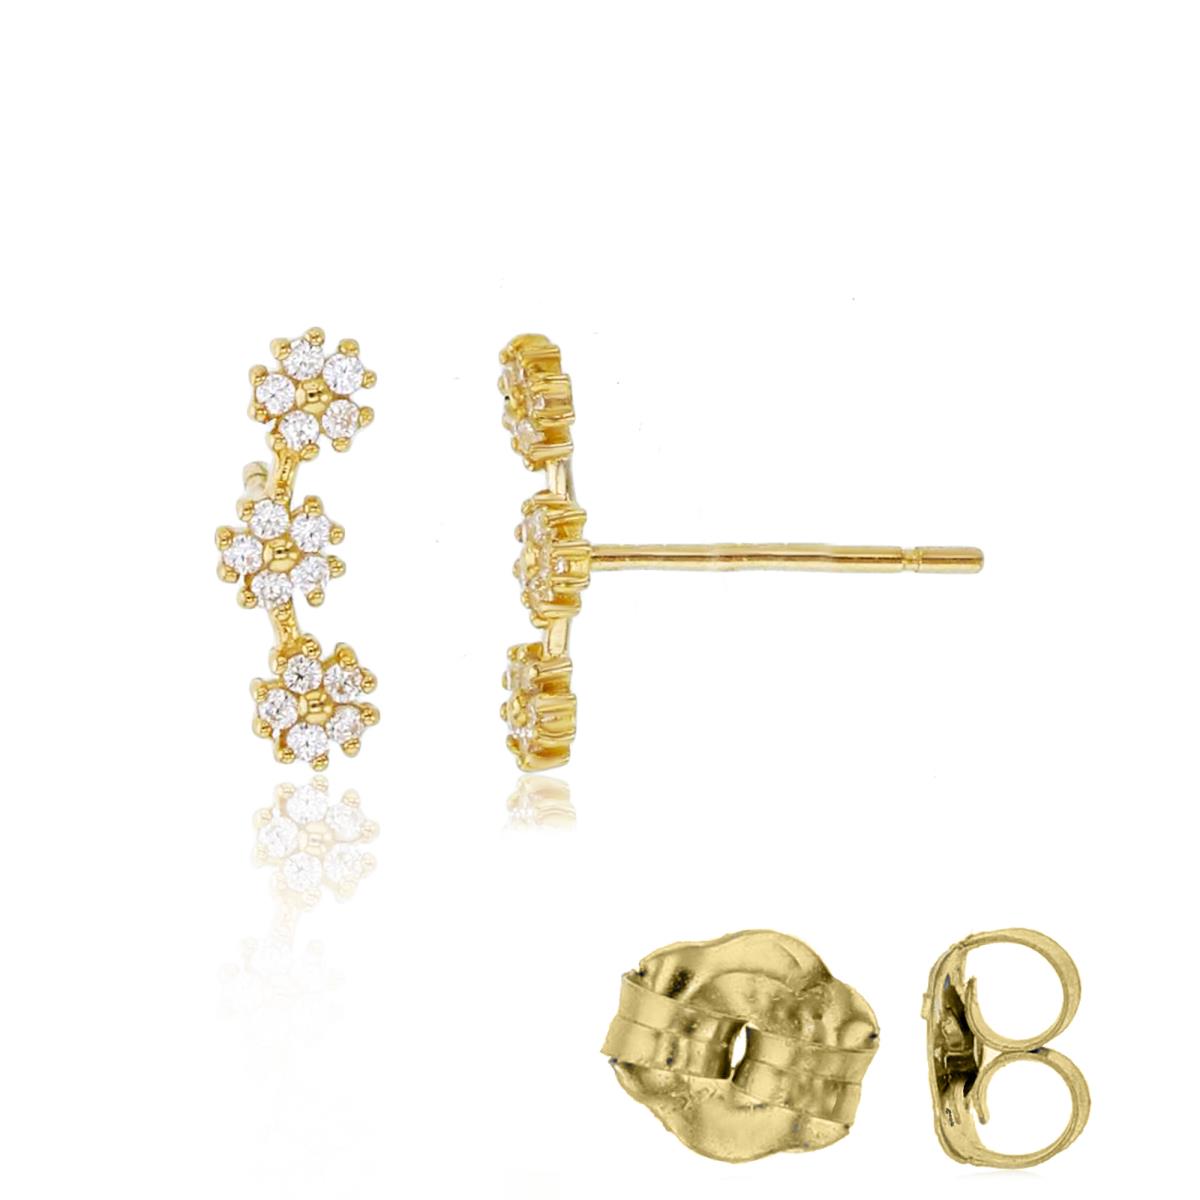 14K Yellow Gold Triple Clusters Ear Crawler with Gold Butterflu Backs